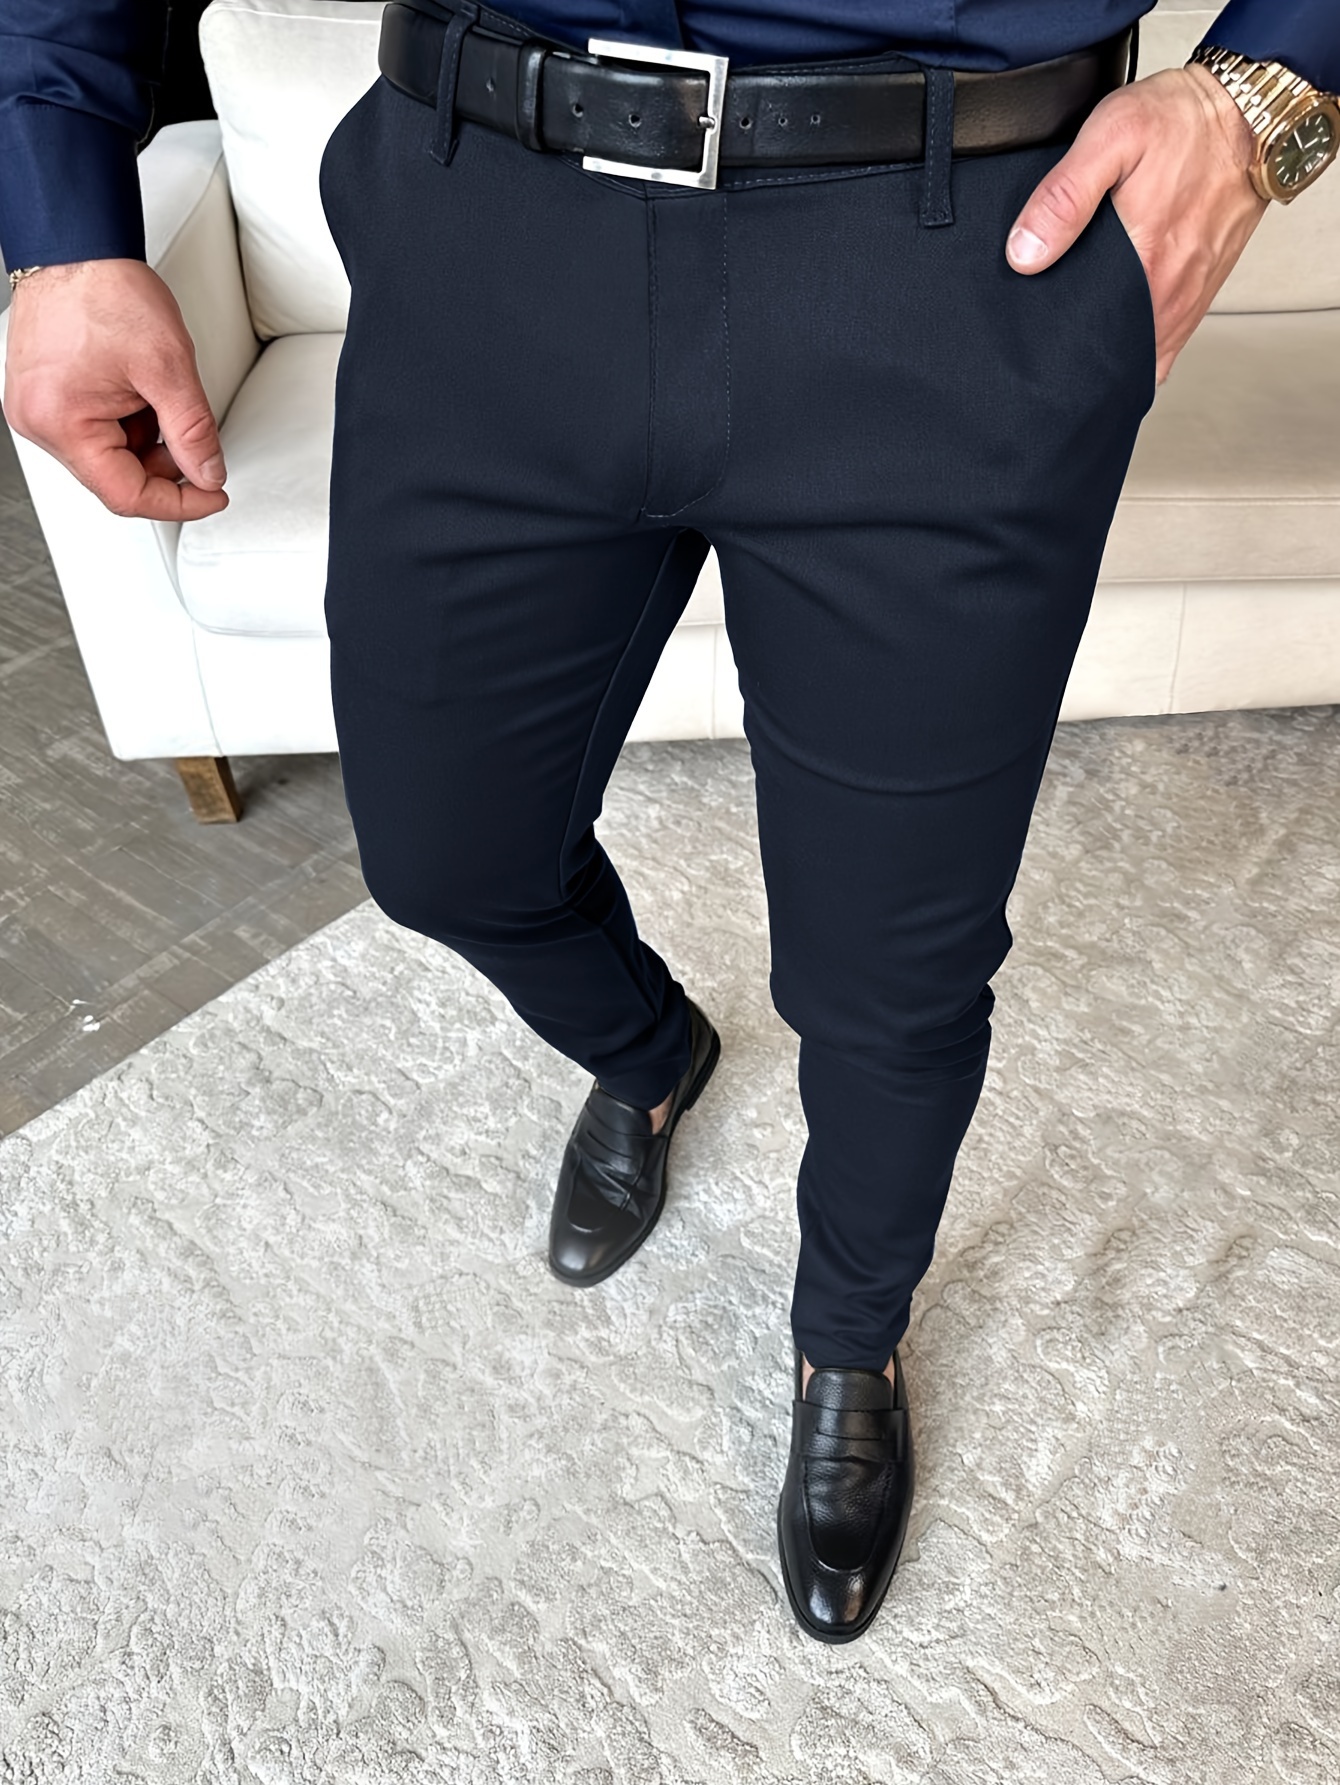 Brglopf Men's Stretch Dress Pants Slim Fit Skinny Suit Pants Business  Trousers Solid Color Suit Pants Work Office Trousers with Pockets 